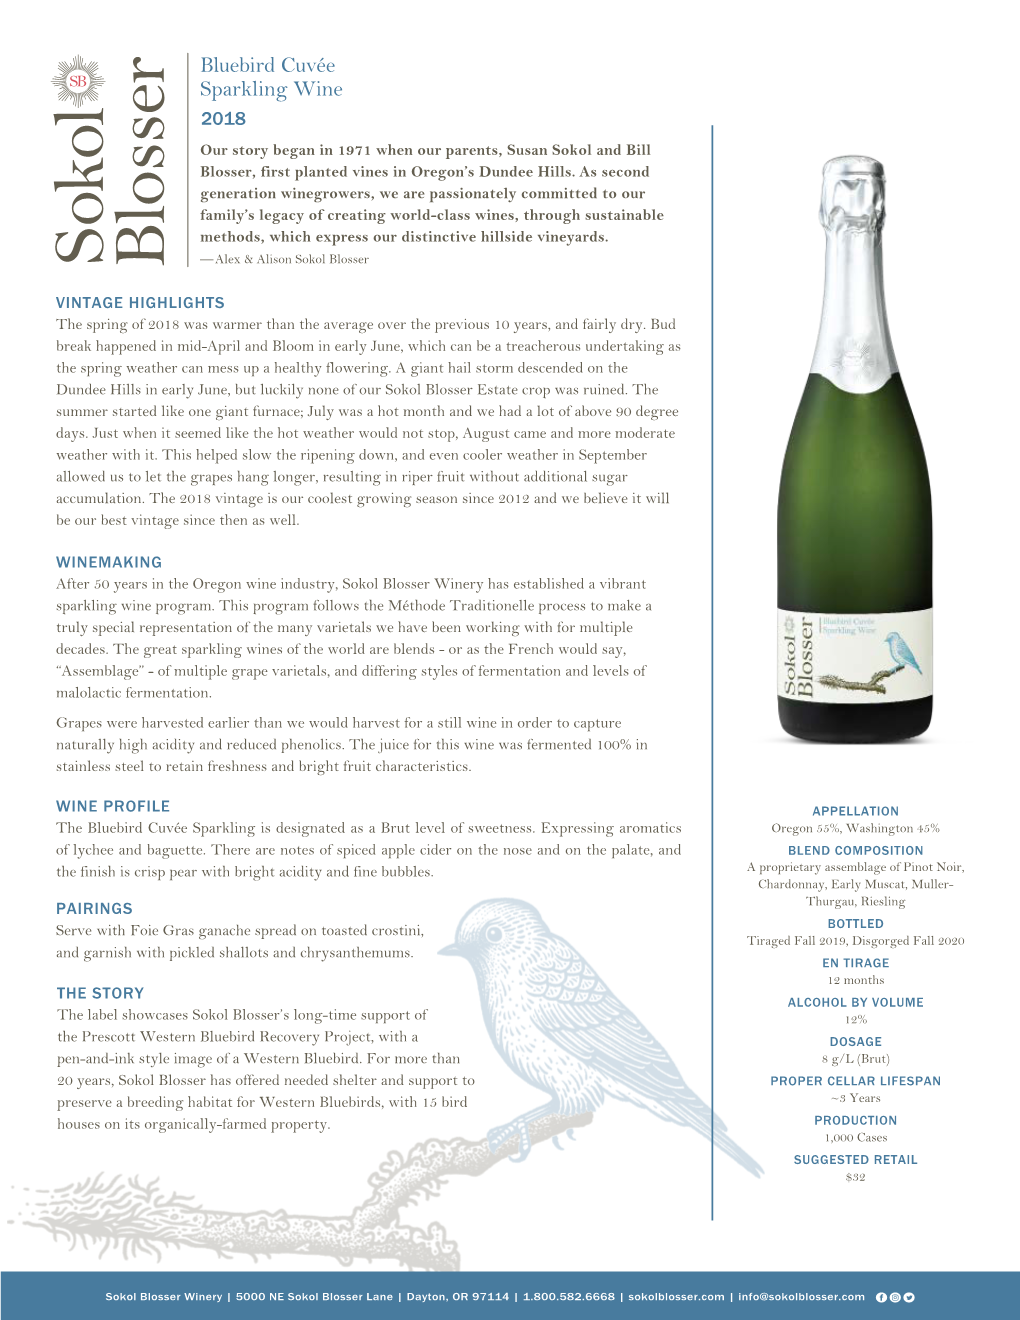 Bluebird Cuvée Sparkling Wine 2018 Our Story Began in 1971 When Our Parents, Susan Sokol and Bill Blosser, First Planted Vines in Oregon’S Dundee Hills